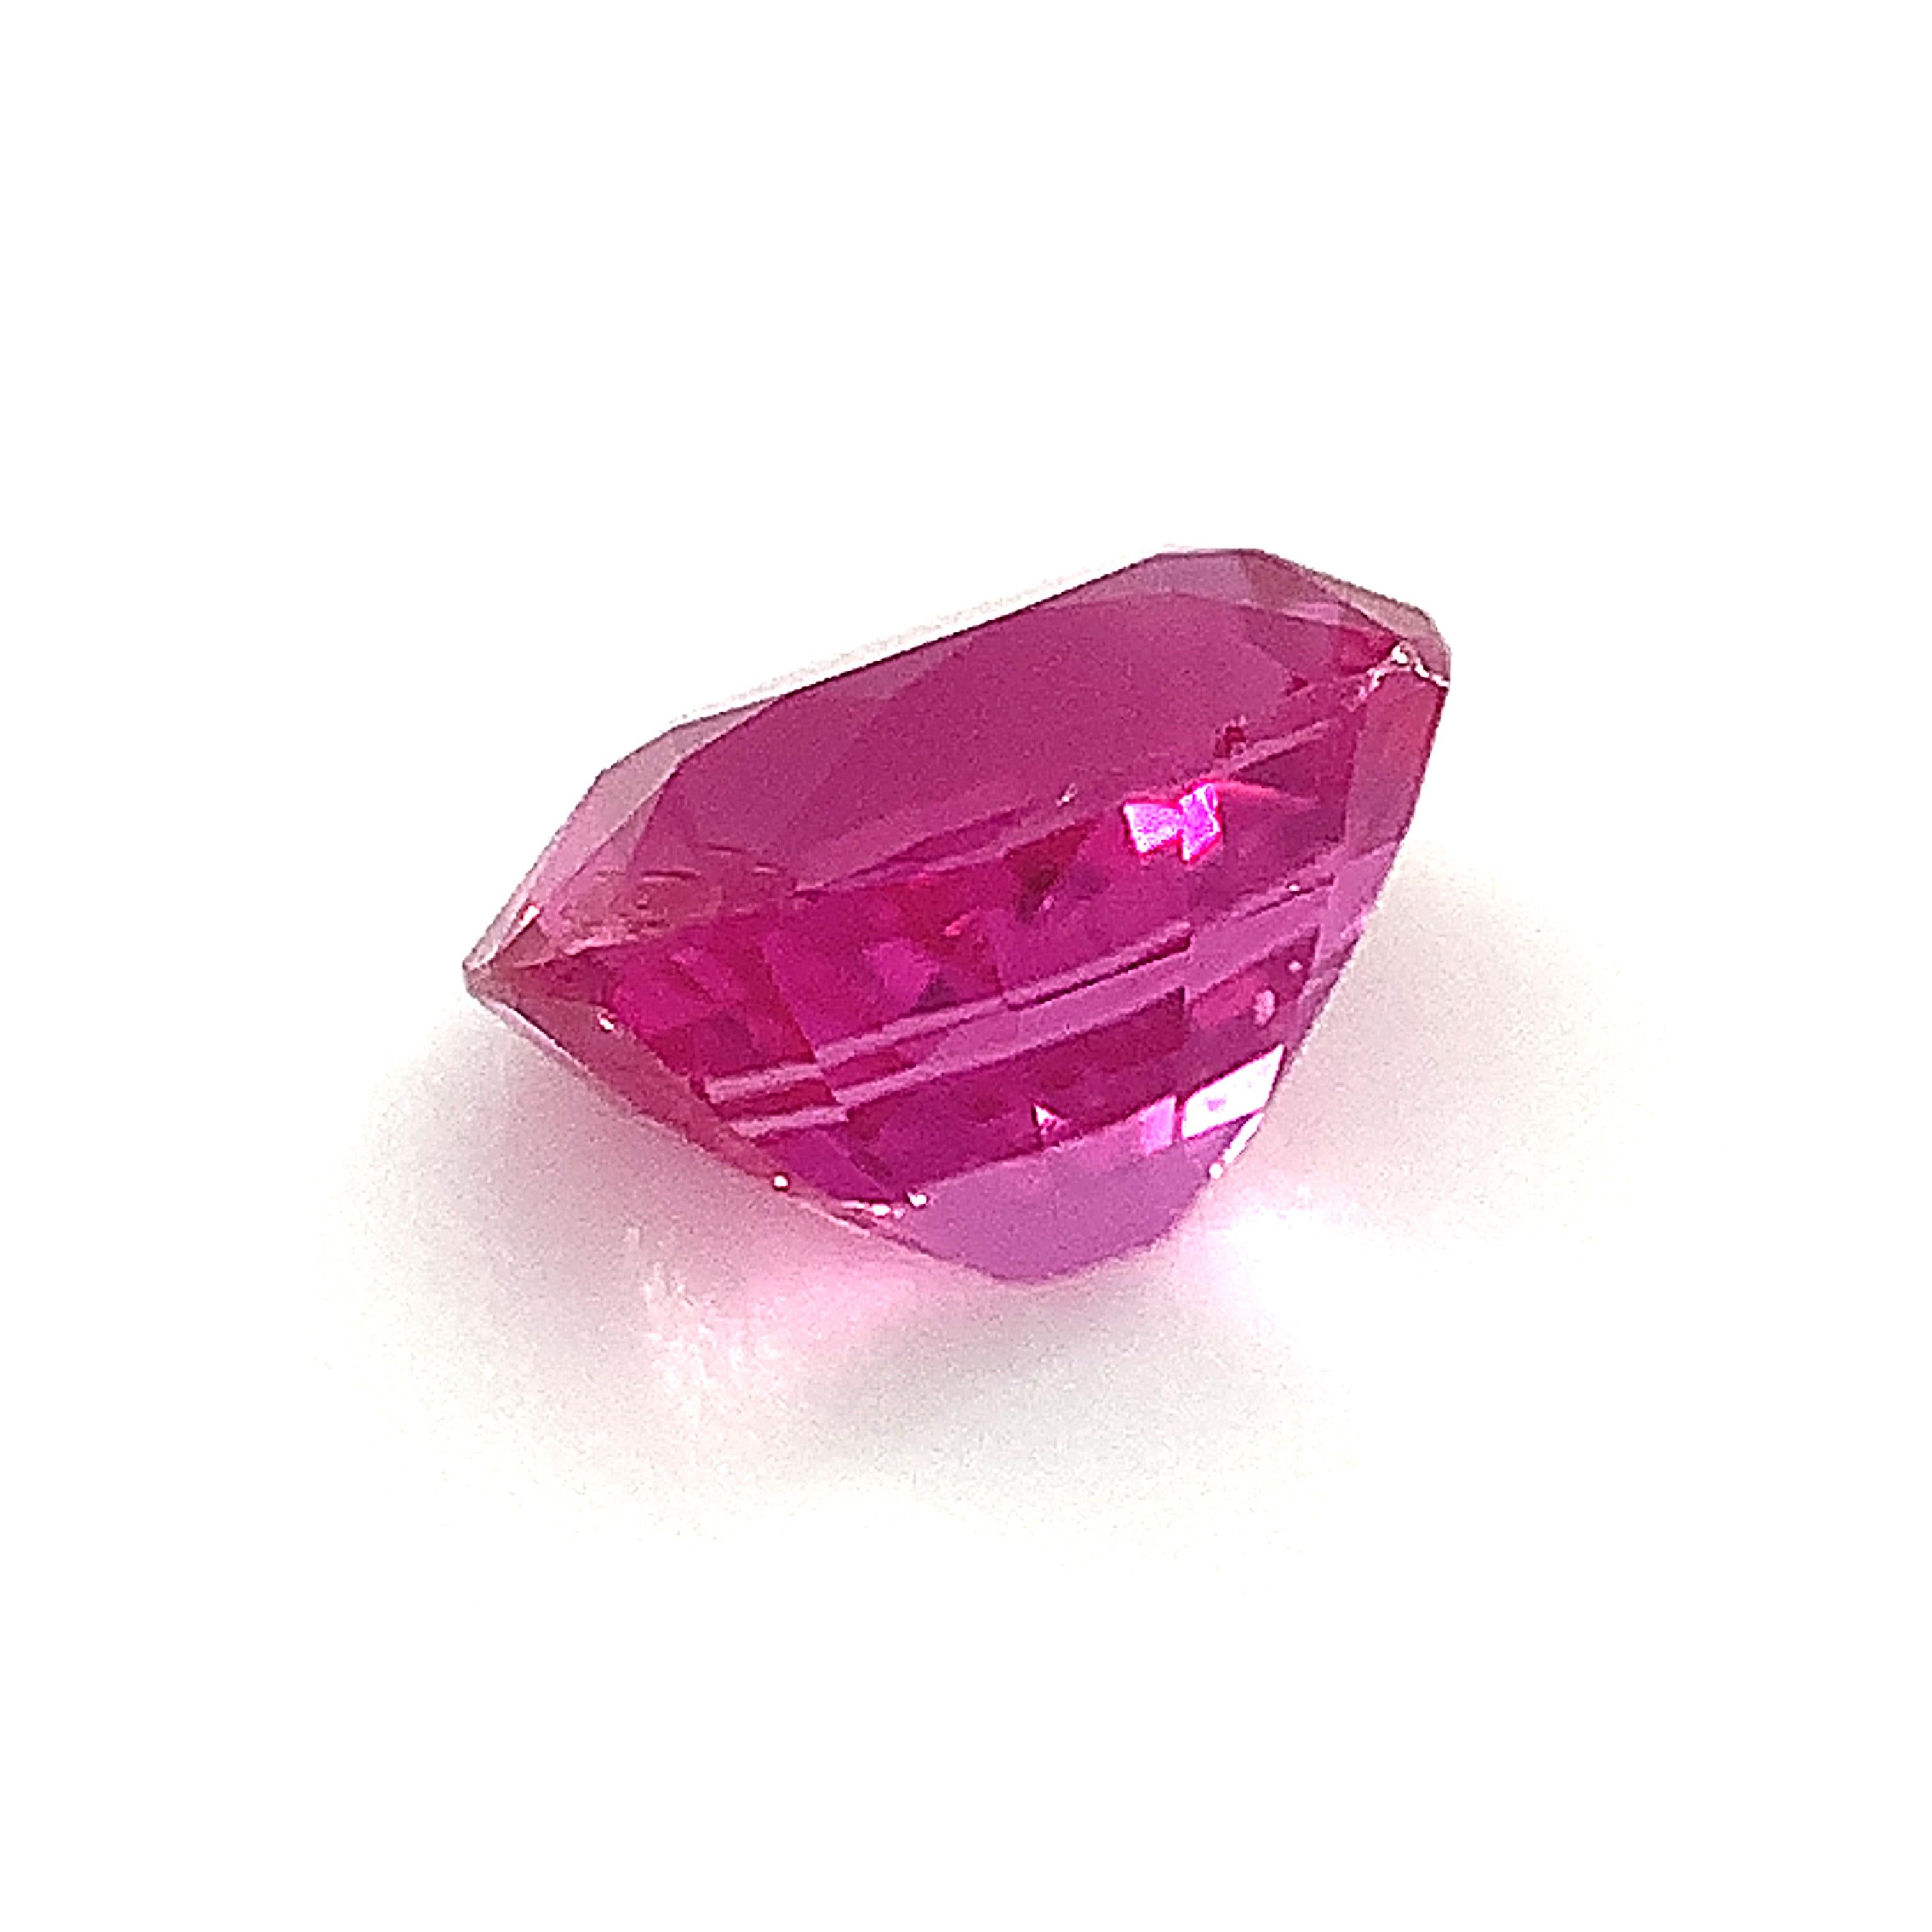 Unheated 1.39 Carat Burmese Pink Sapphire, Unset Loose Gemstone, GIA Certified For Sale 1